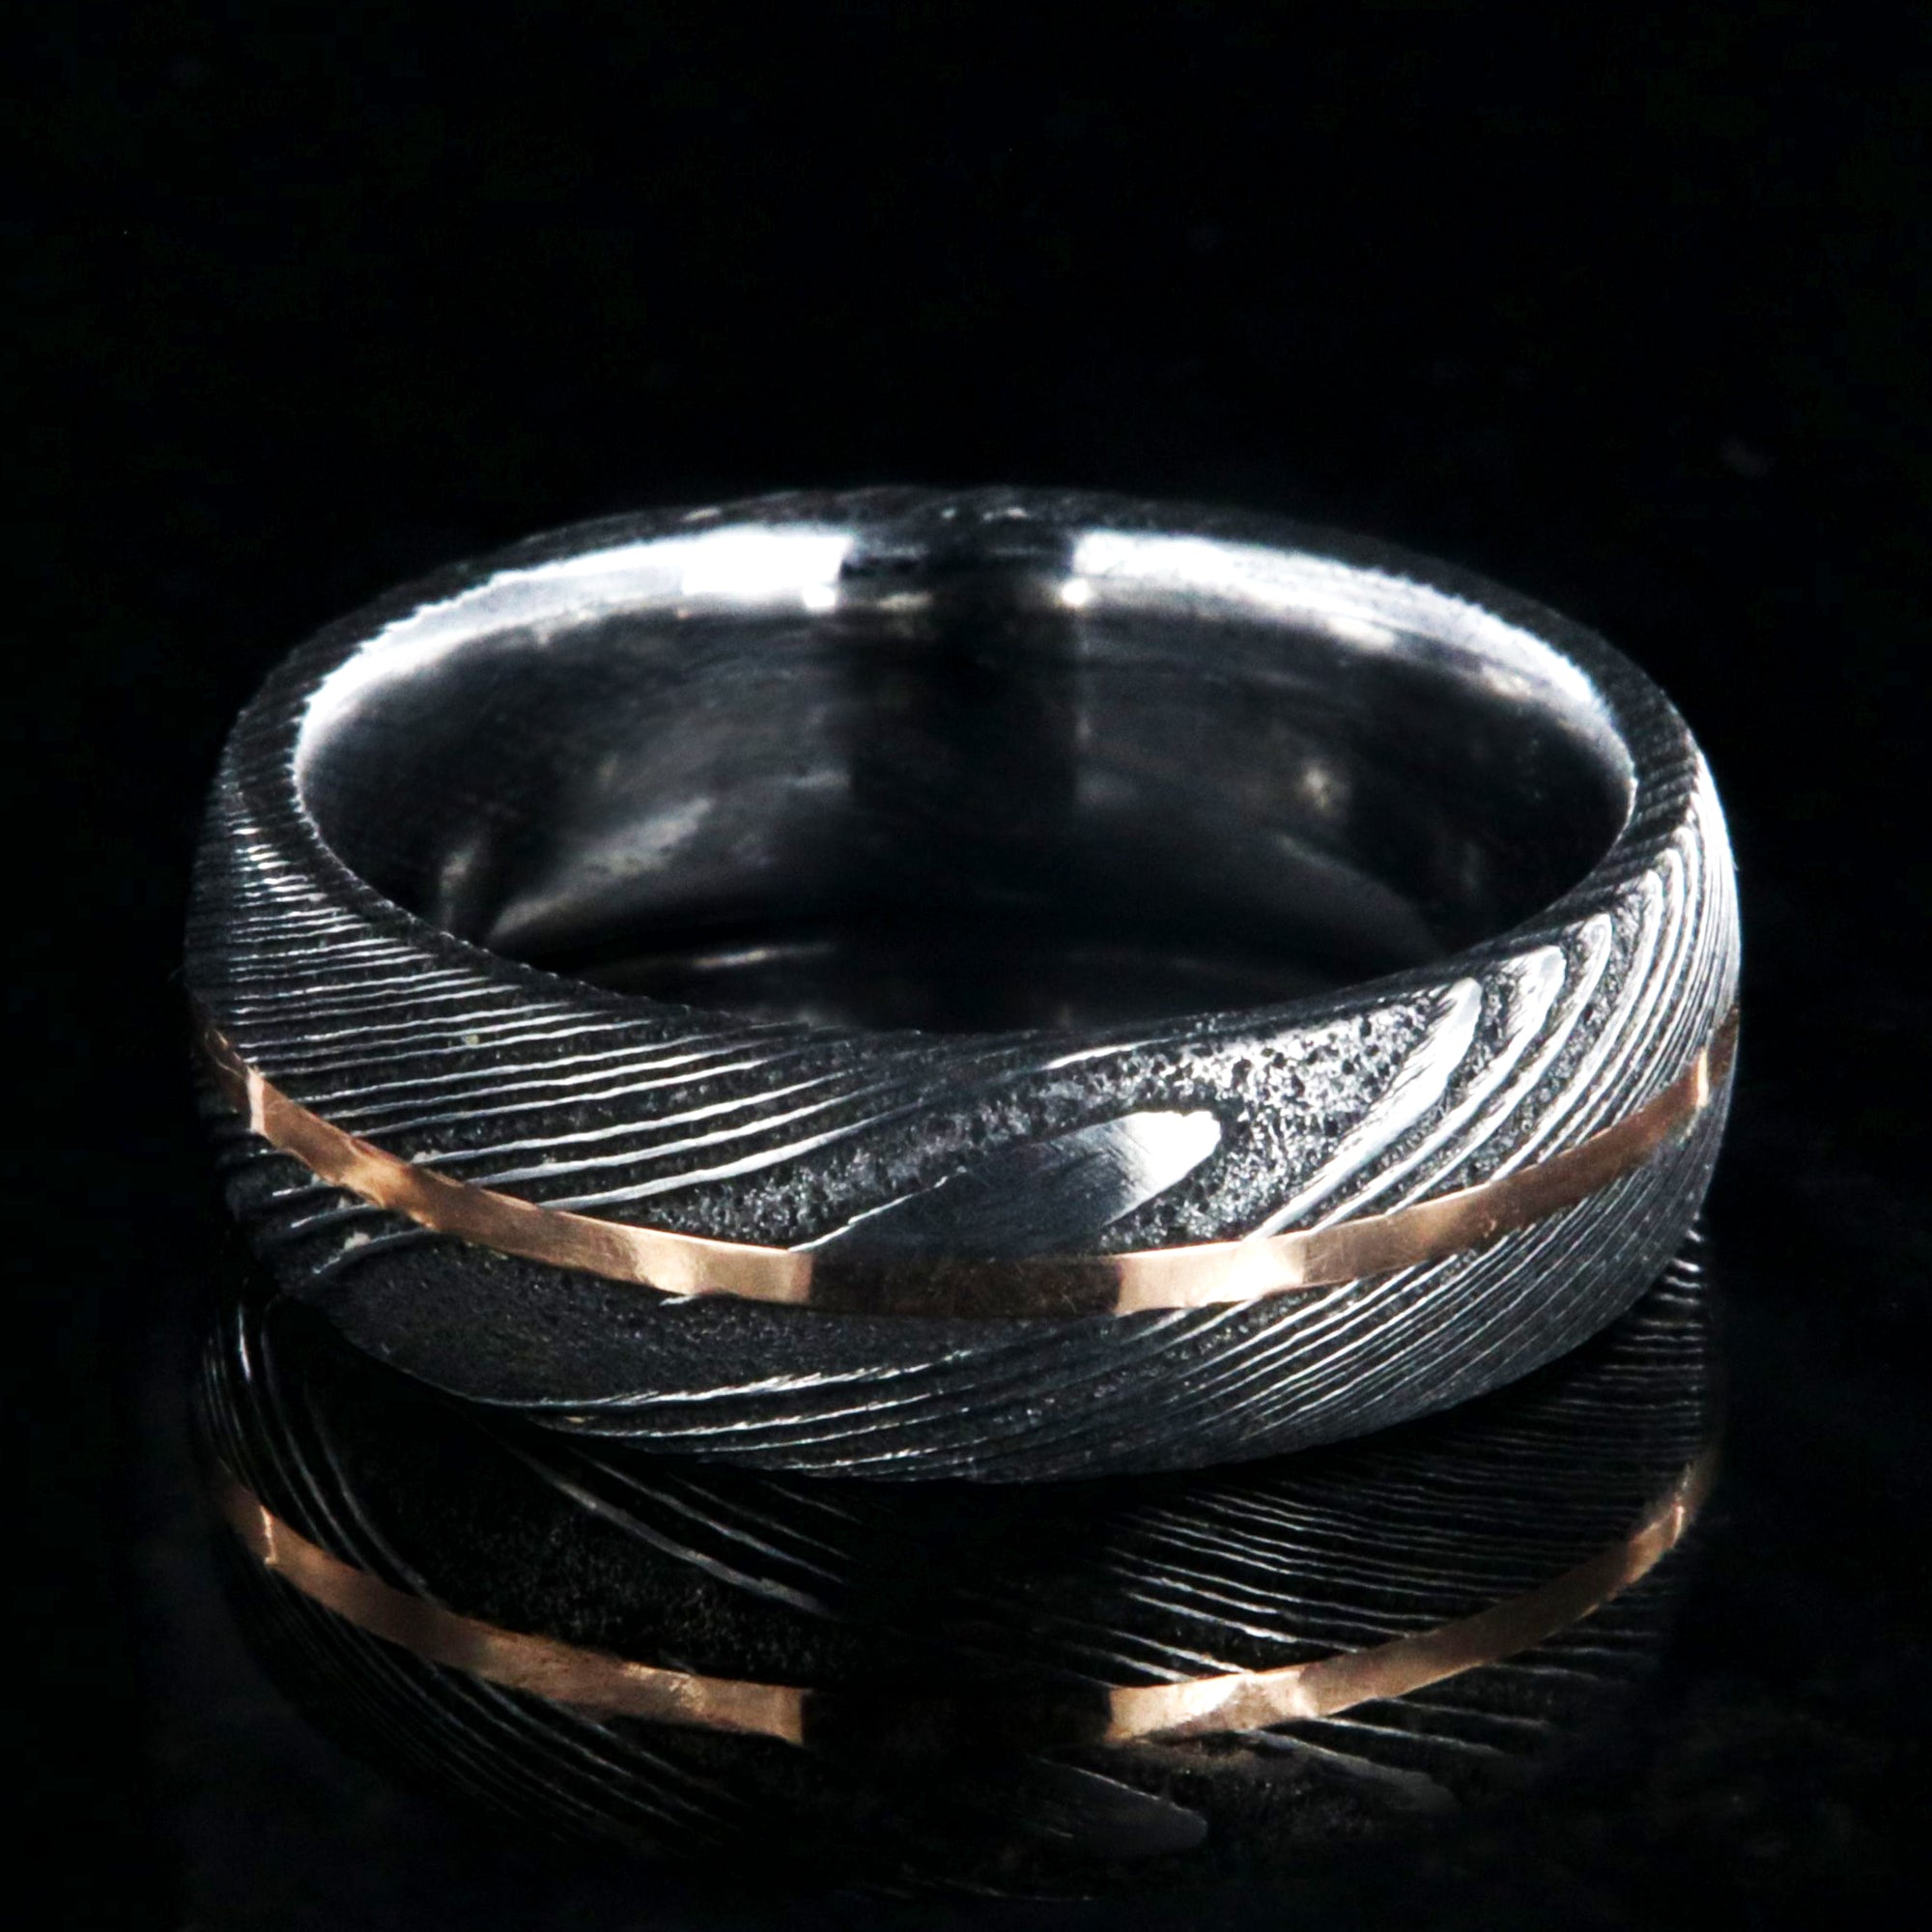 7mm wide black Damascus steel men's wedding band with centered rose gold inlay and polished inside